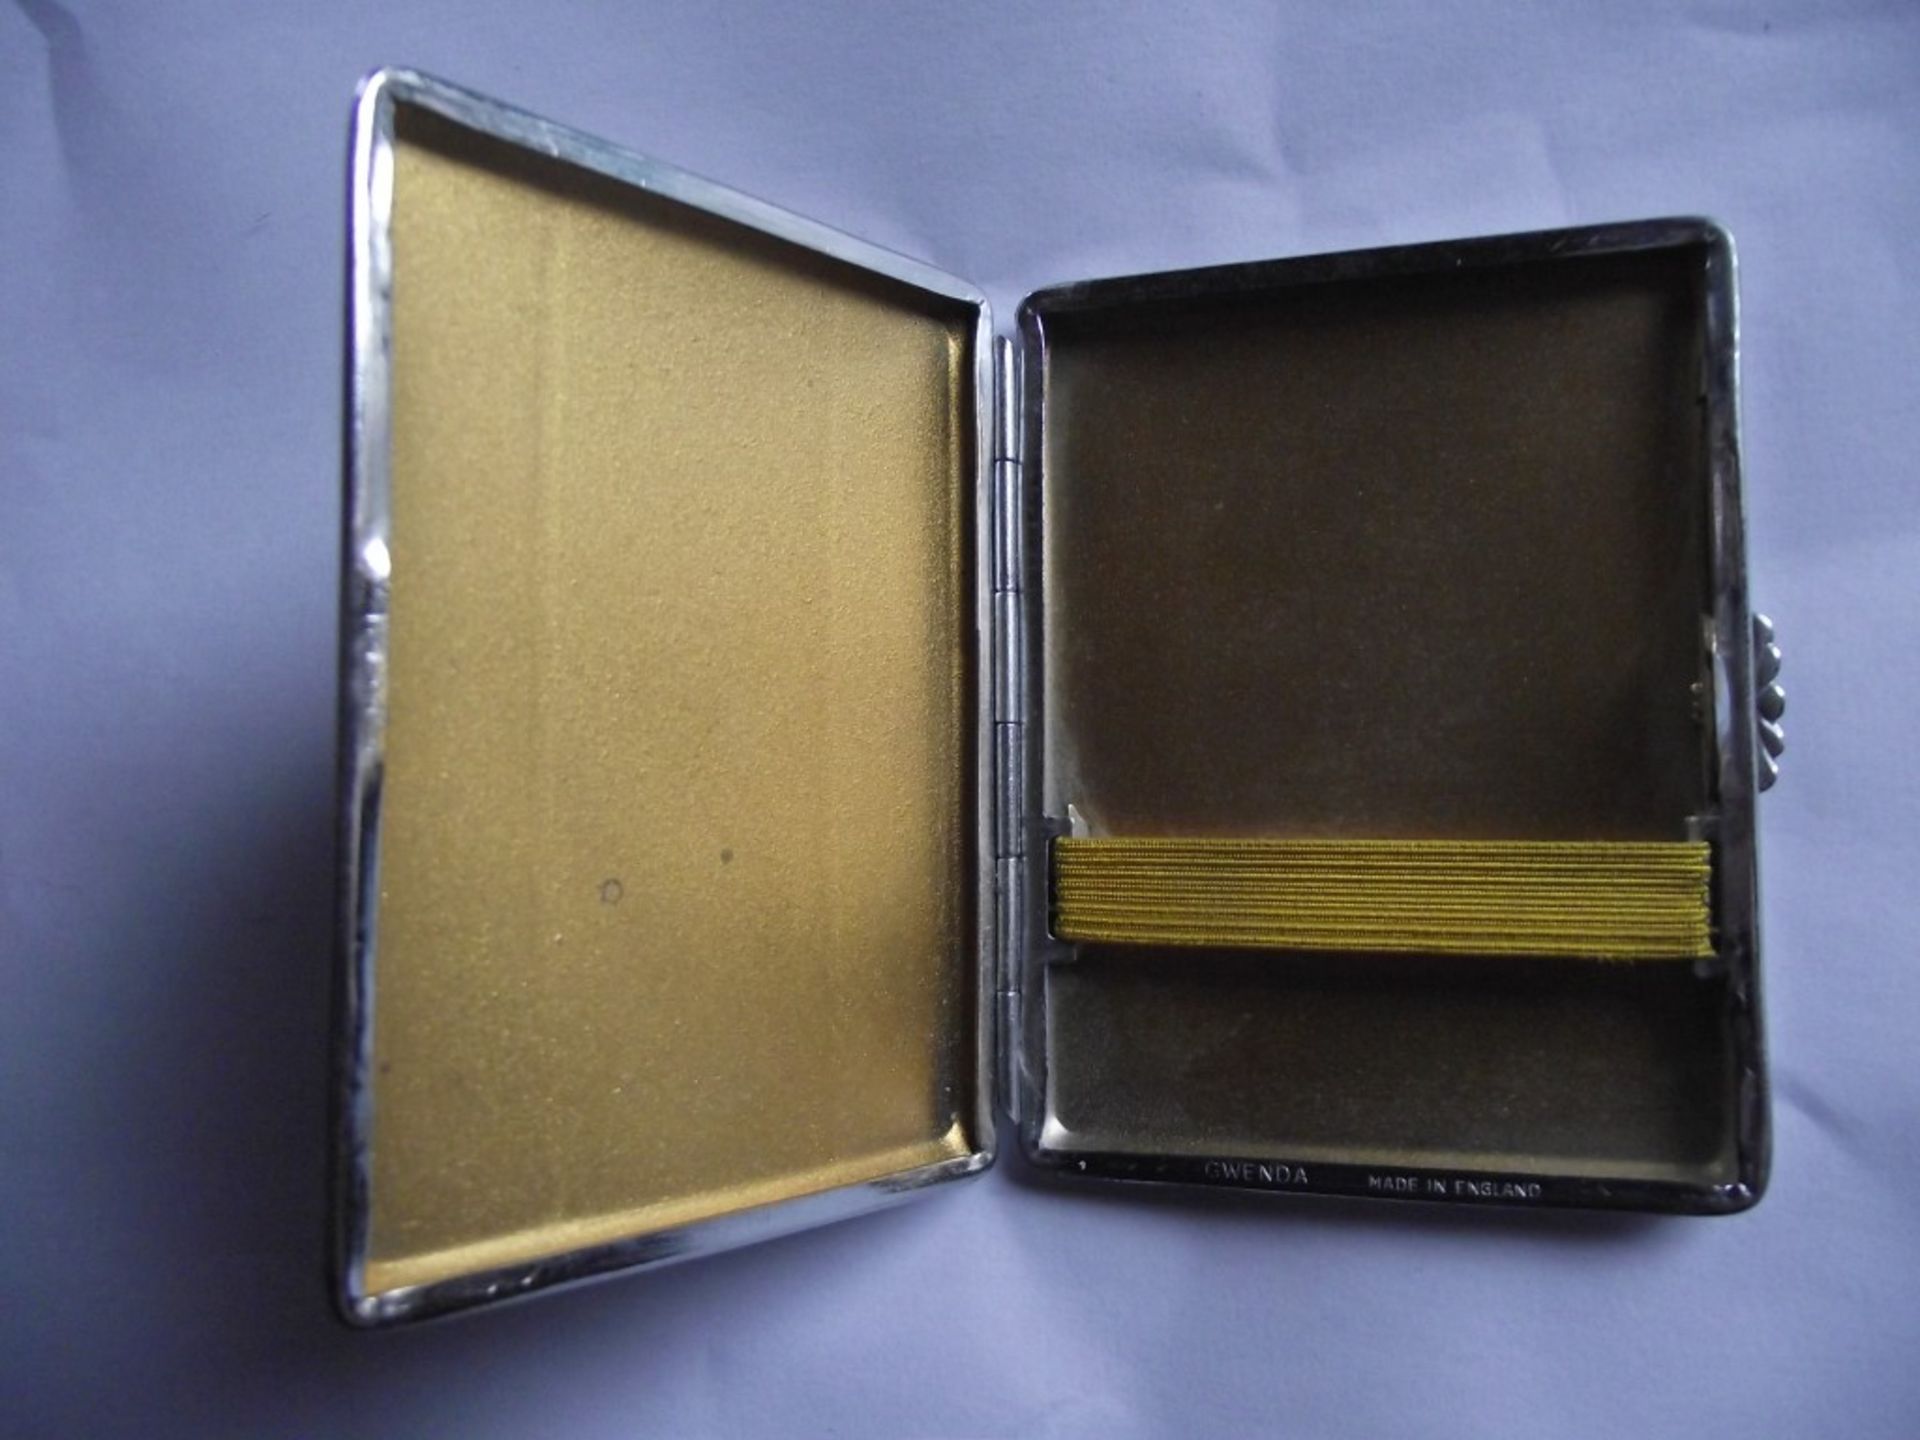 5 X 1930's Gwenda Powder Compacts & Cigarette Case - New Old Stock (unused)- original boxes. - Image 7 of 16